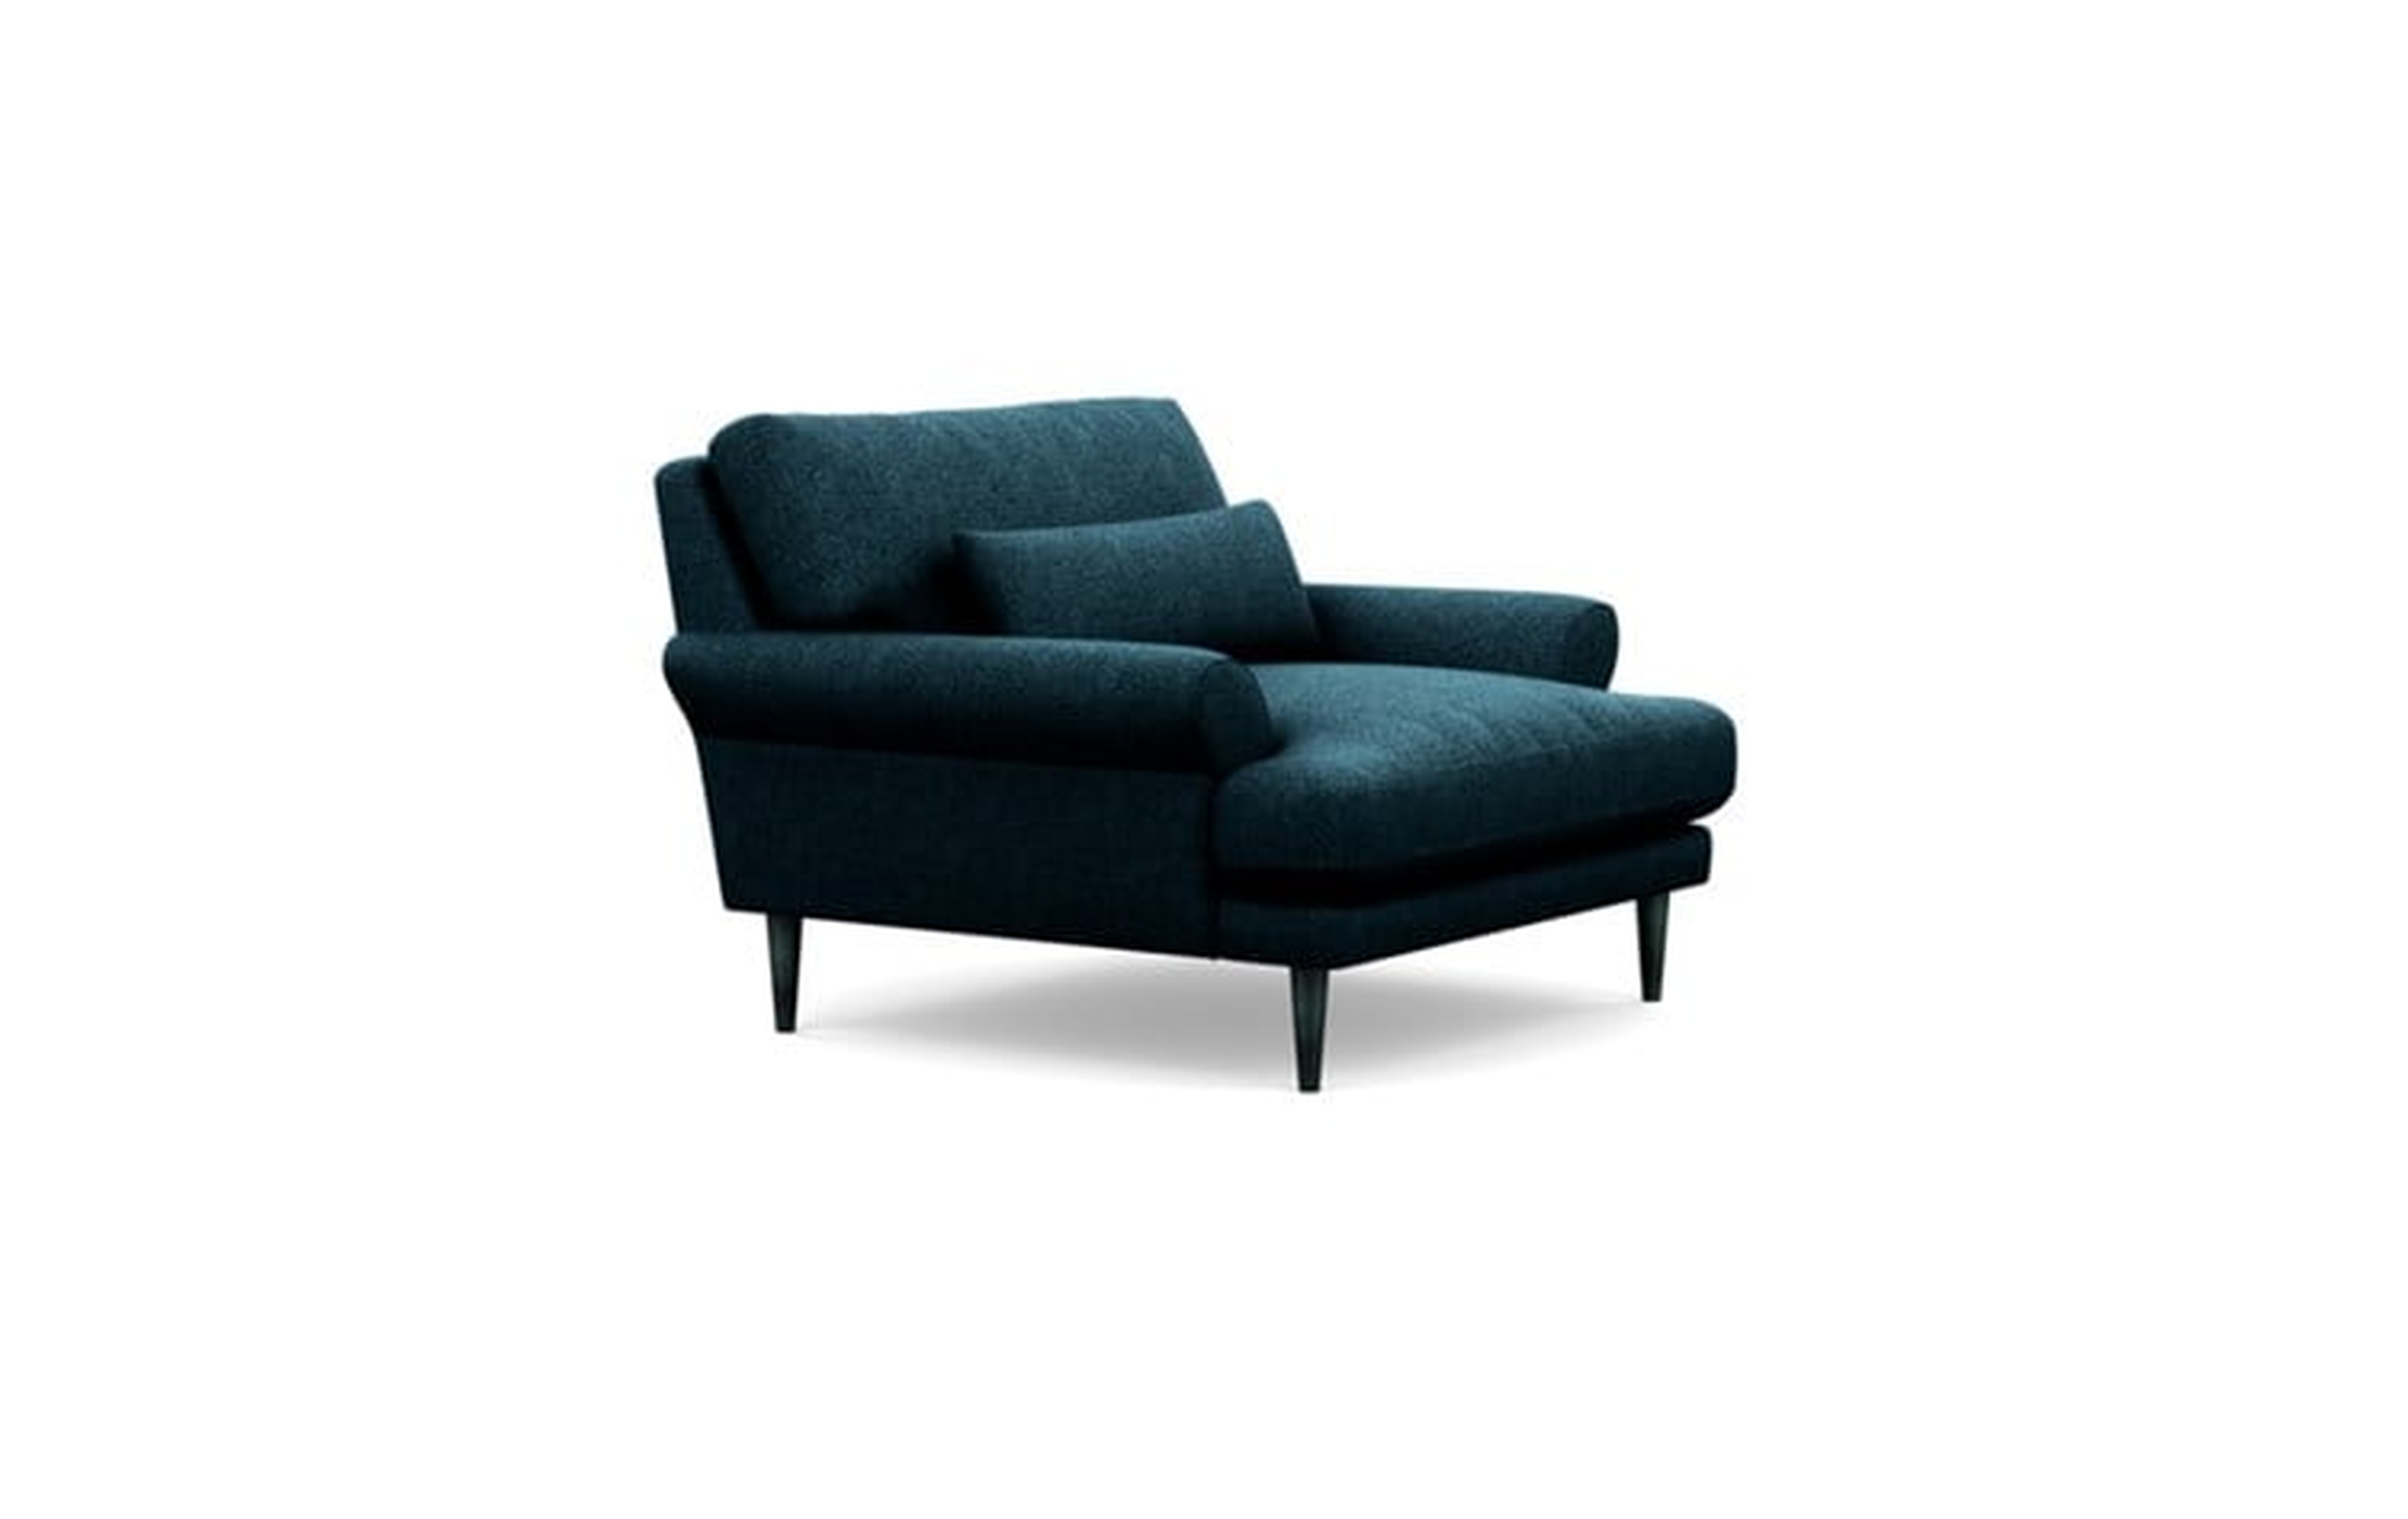 Maxwell Chairs with Indigo Fabric and Unfinished GunMetal legs - Interior Define